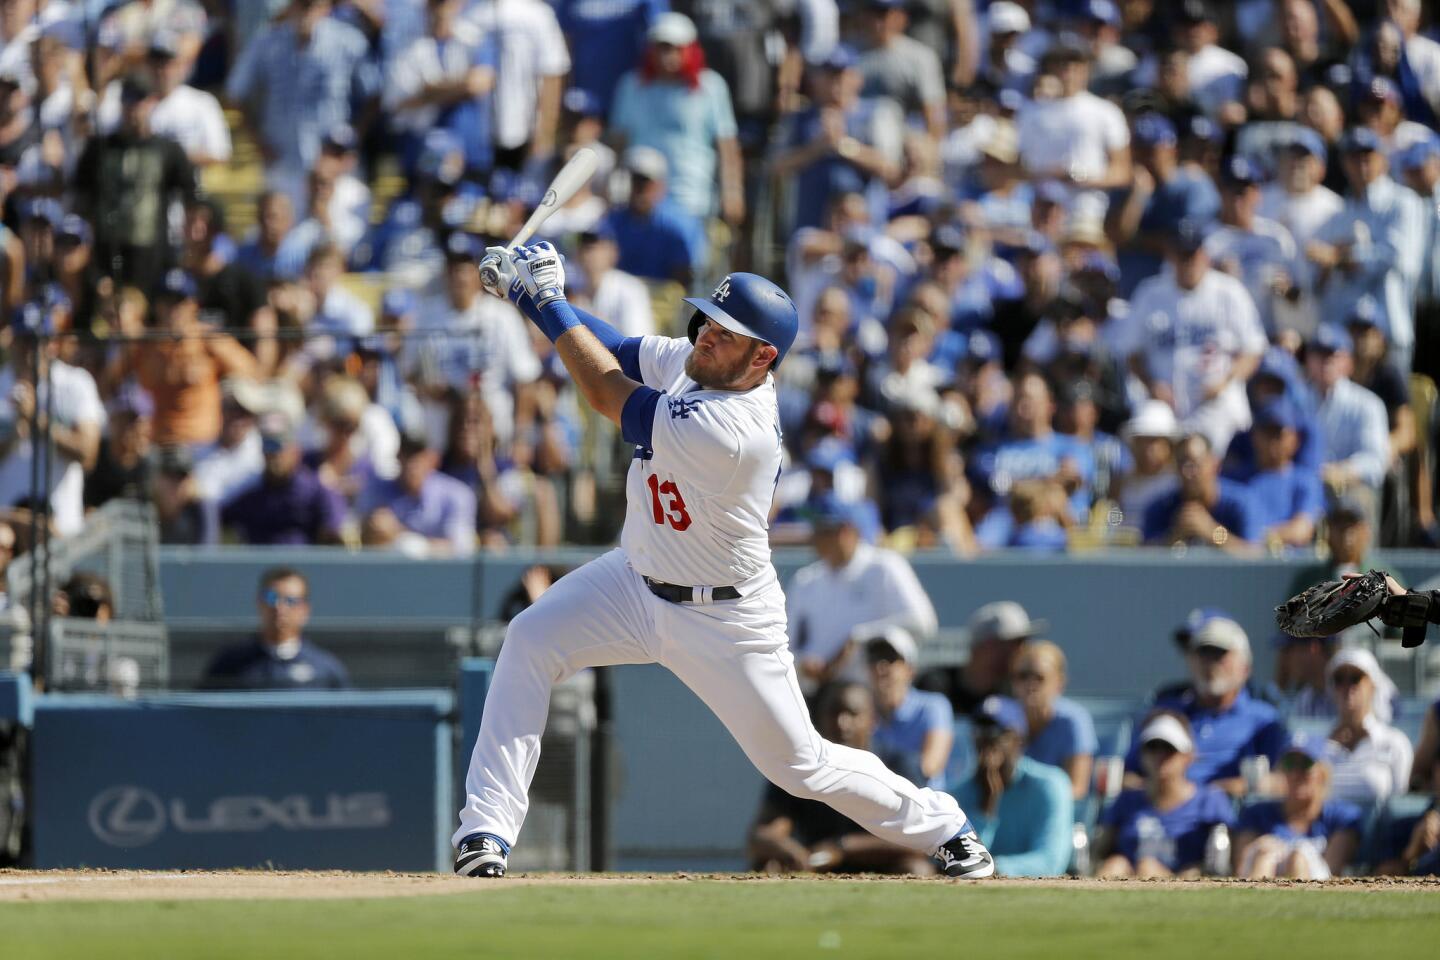 Dodgers first baseman Max Muncy (13) hits a two-run home run off Colorado Rockies starting pitcher German Marquez (48) in the fifth inning in a NL West tiebreaker game.